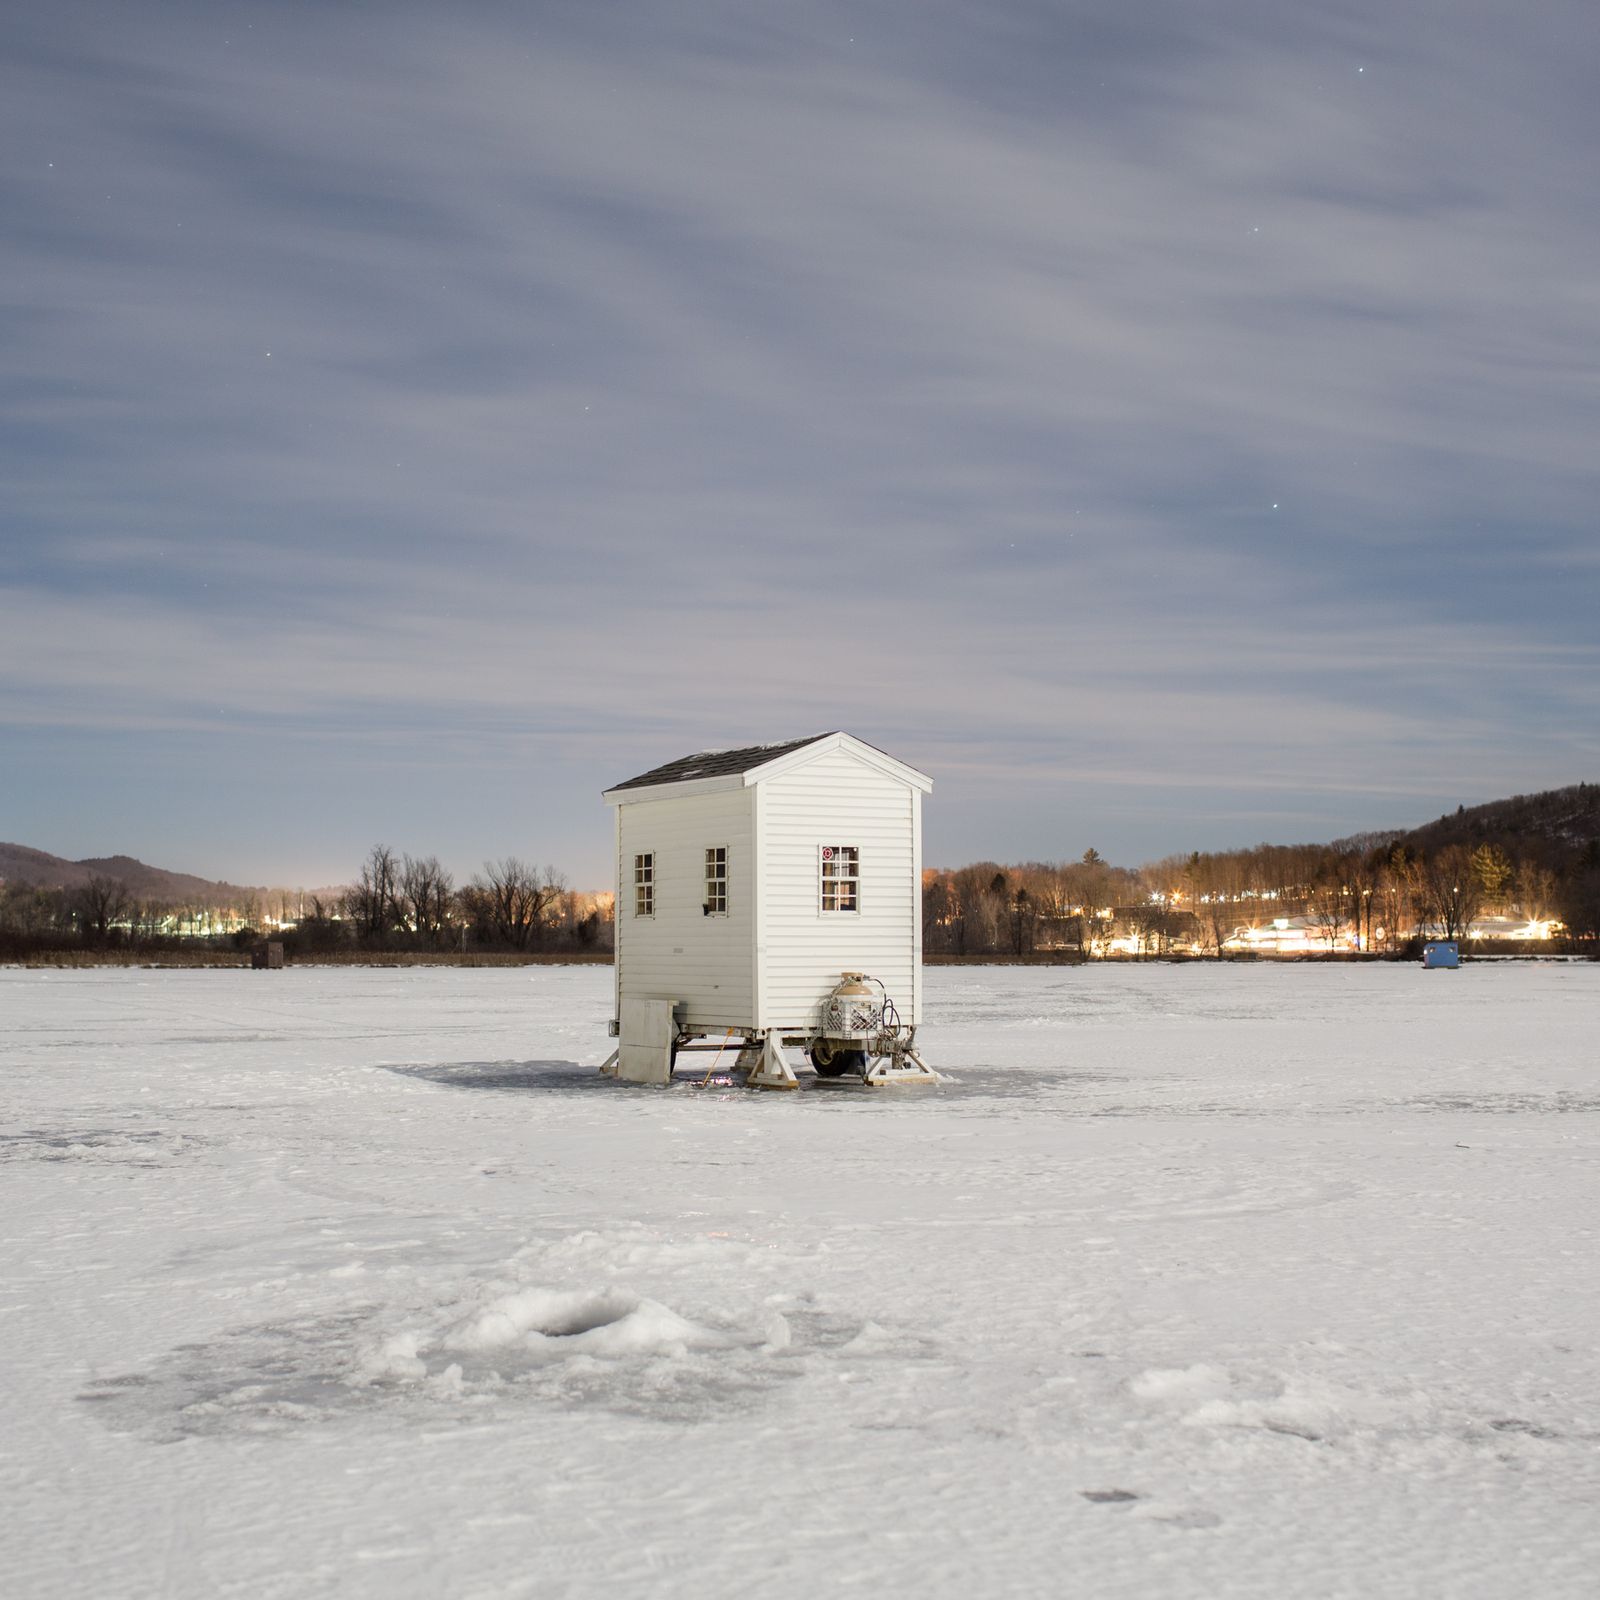 © Federico Pardo - Image from the Ice shanties photography project